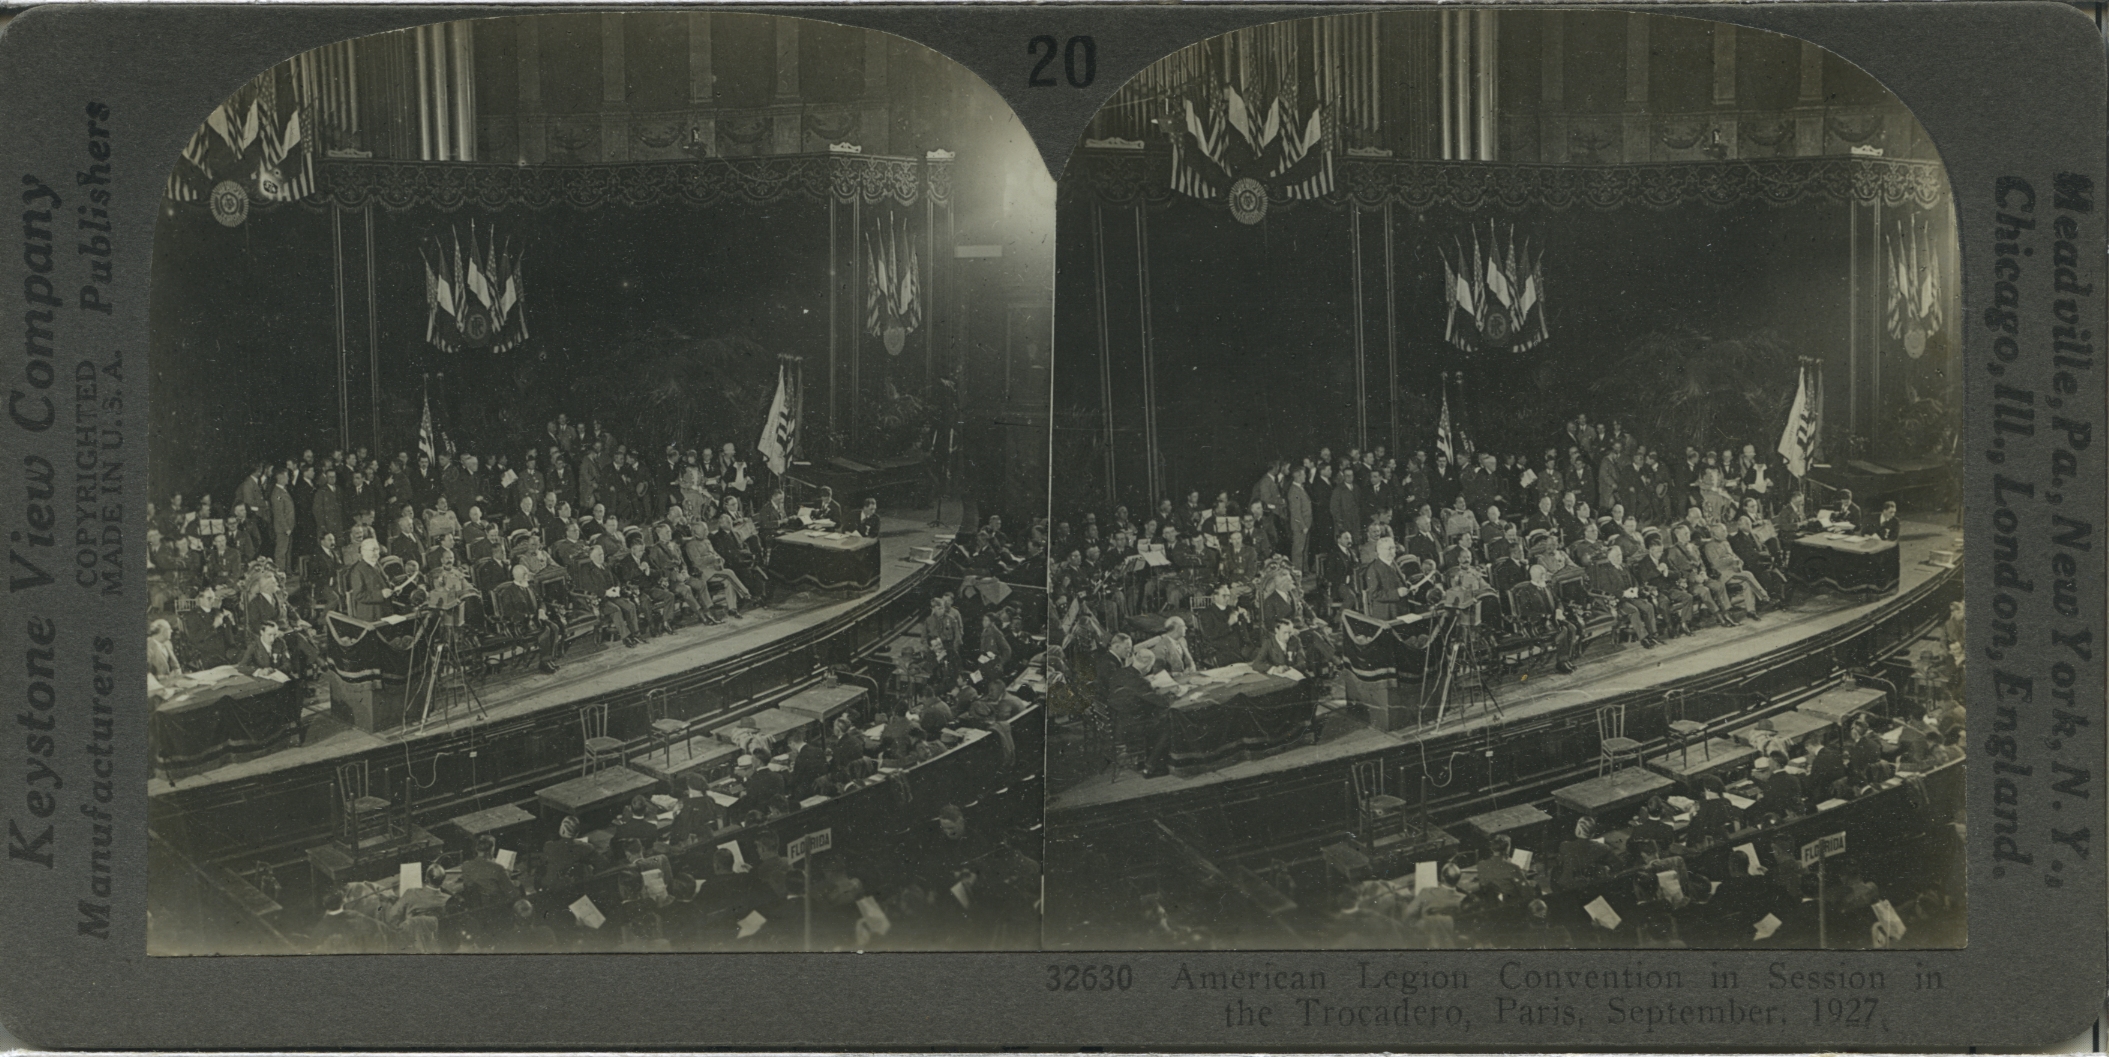 American Legion Convention in Session in the Trocadero, Paris, September, 1927.